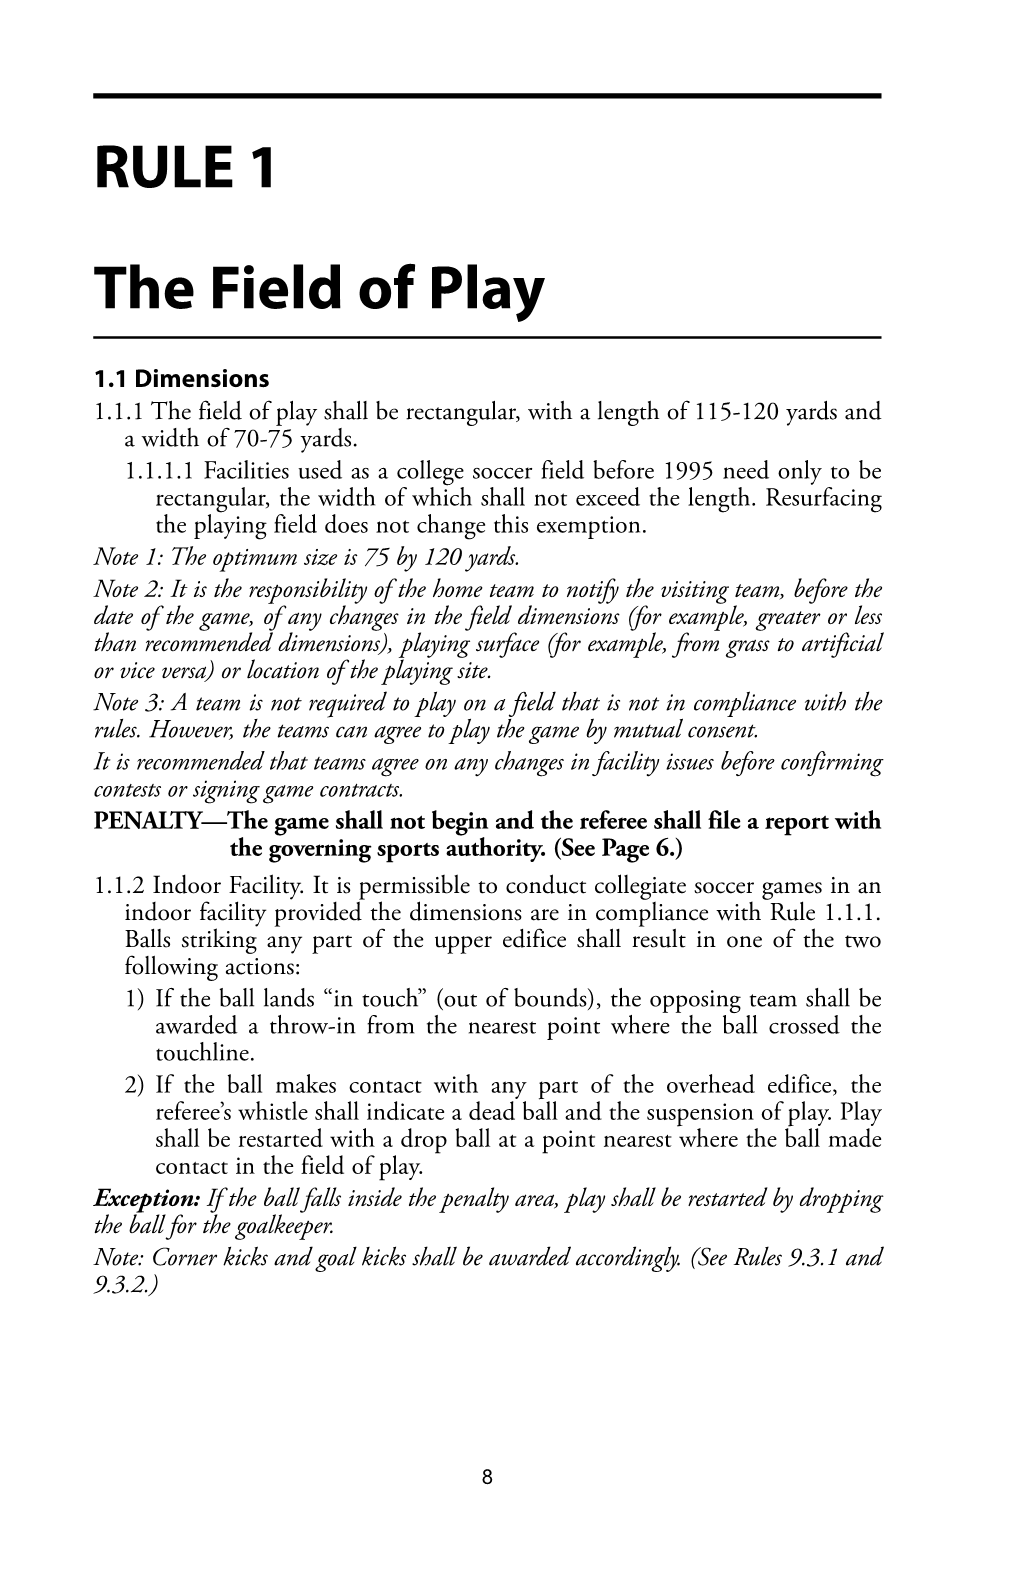 RULE 1 the Field of Play